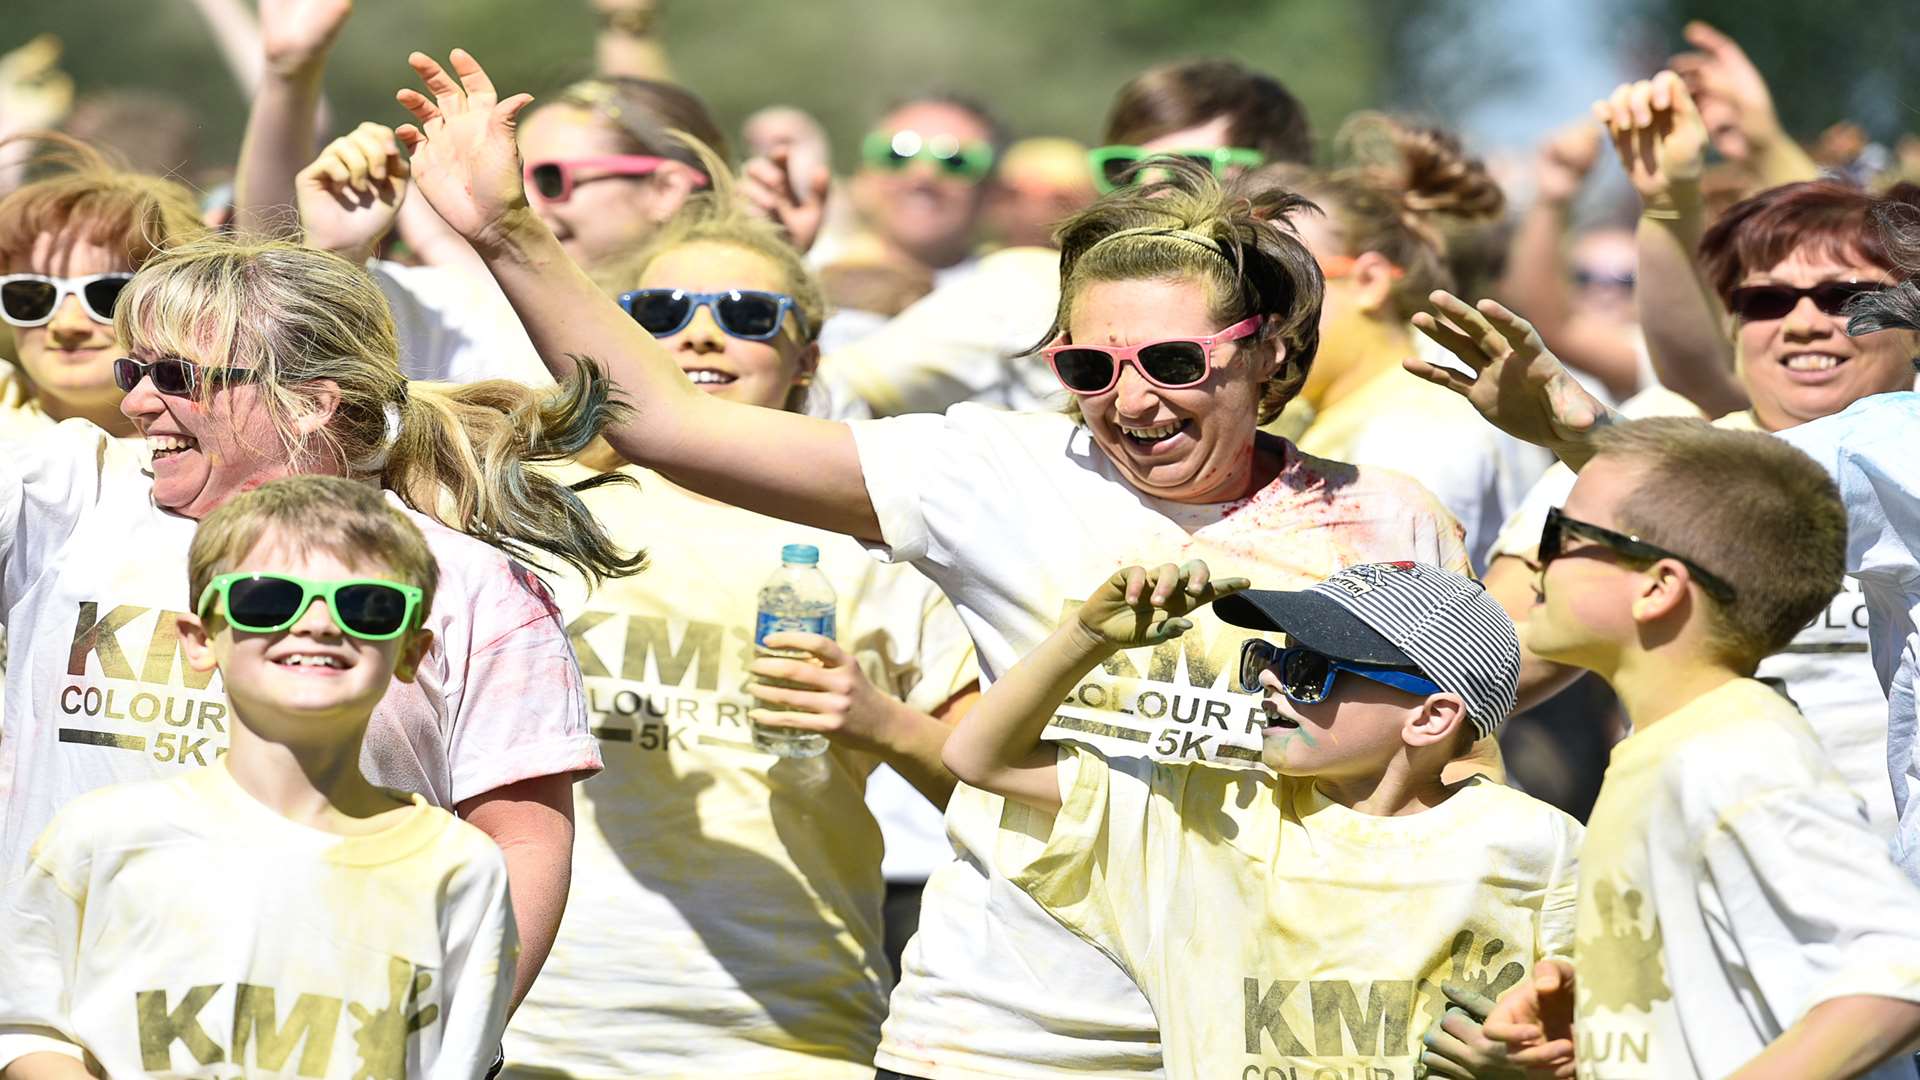 All smiles at the 2015 KM Colour Run. The 2016 event takes place on Sunday, June 12 at Betteshanger Park, near Deal.